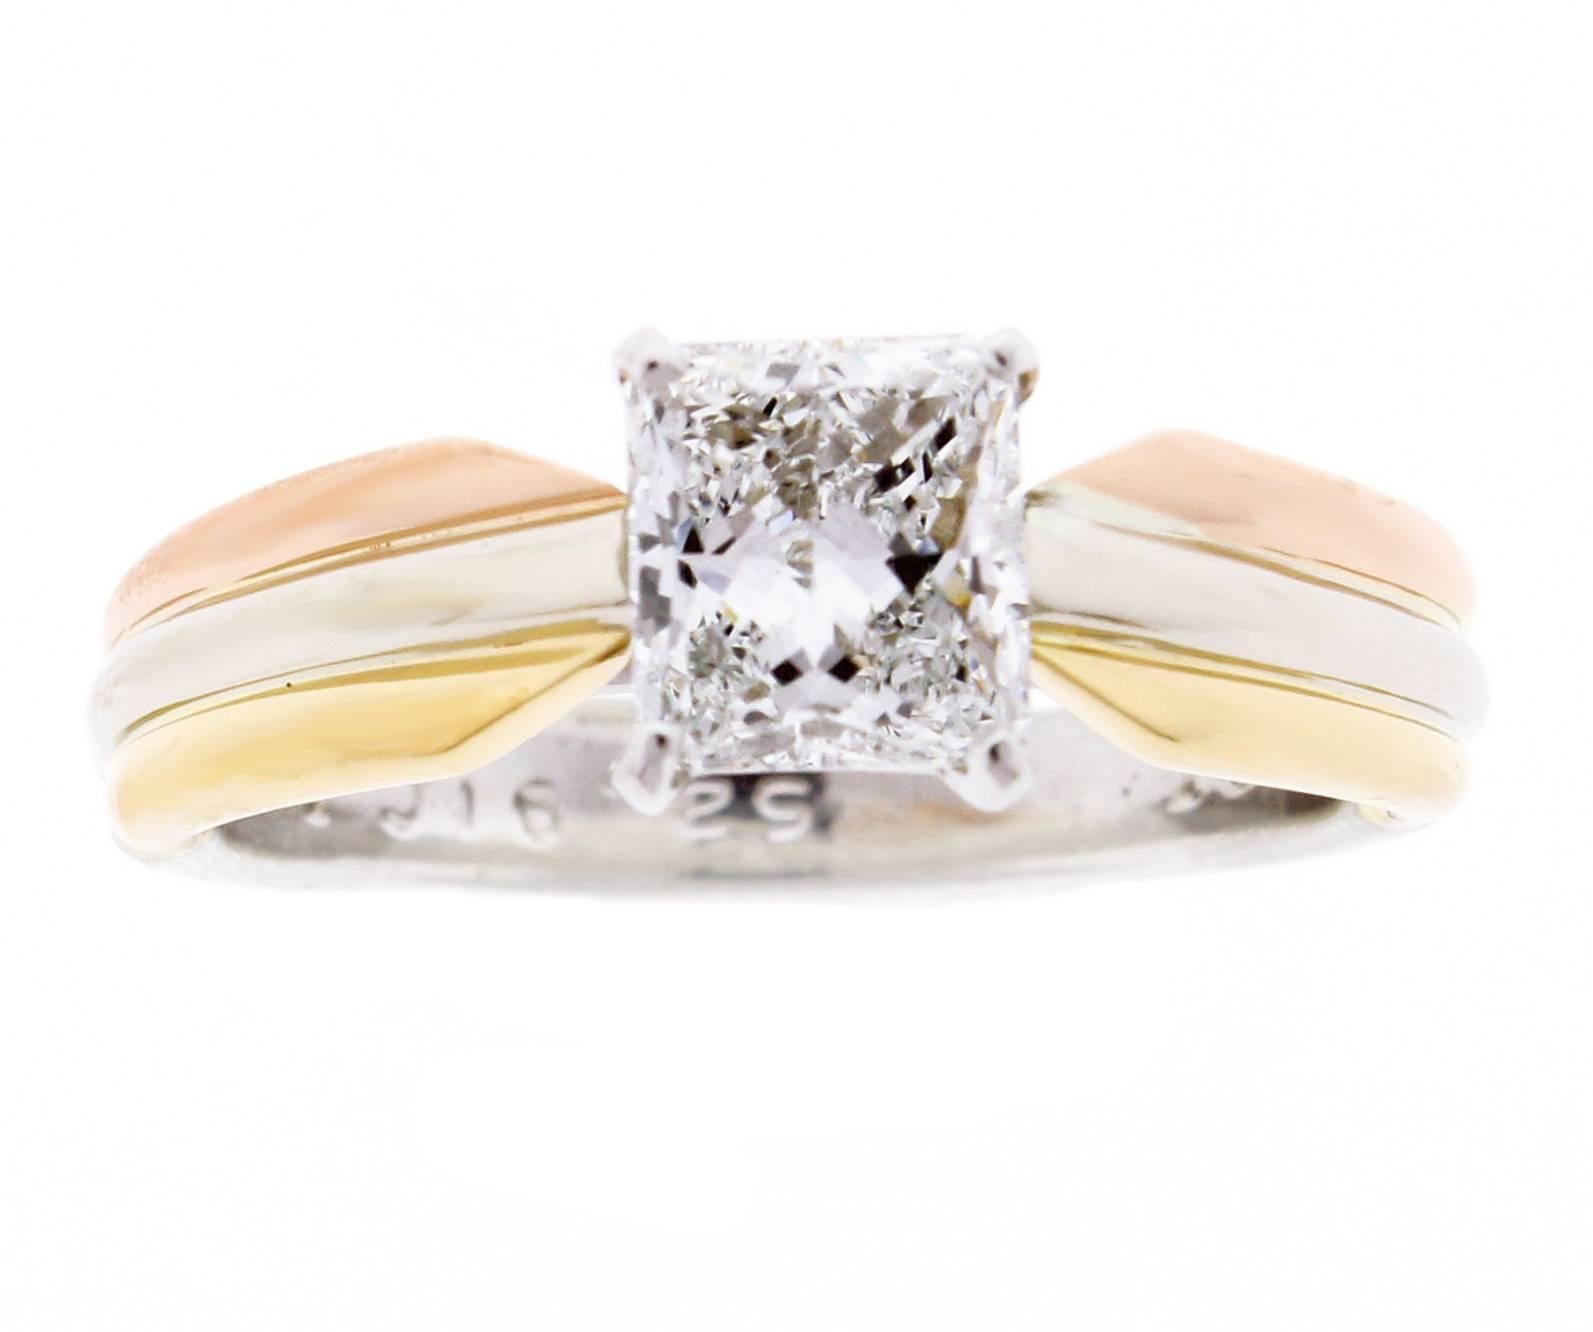 Three bands. Three colors. Pink gold, yellow gold and platinum, intertwined in a display of mystery and harmony.  The iconic Cartier Trinity engagement ring set with a stunning radiant cut diamond weighing .91 carat, F color and VS2 clarity. G.I.A.